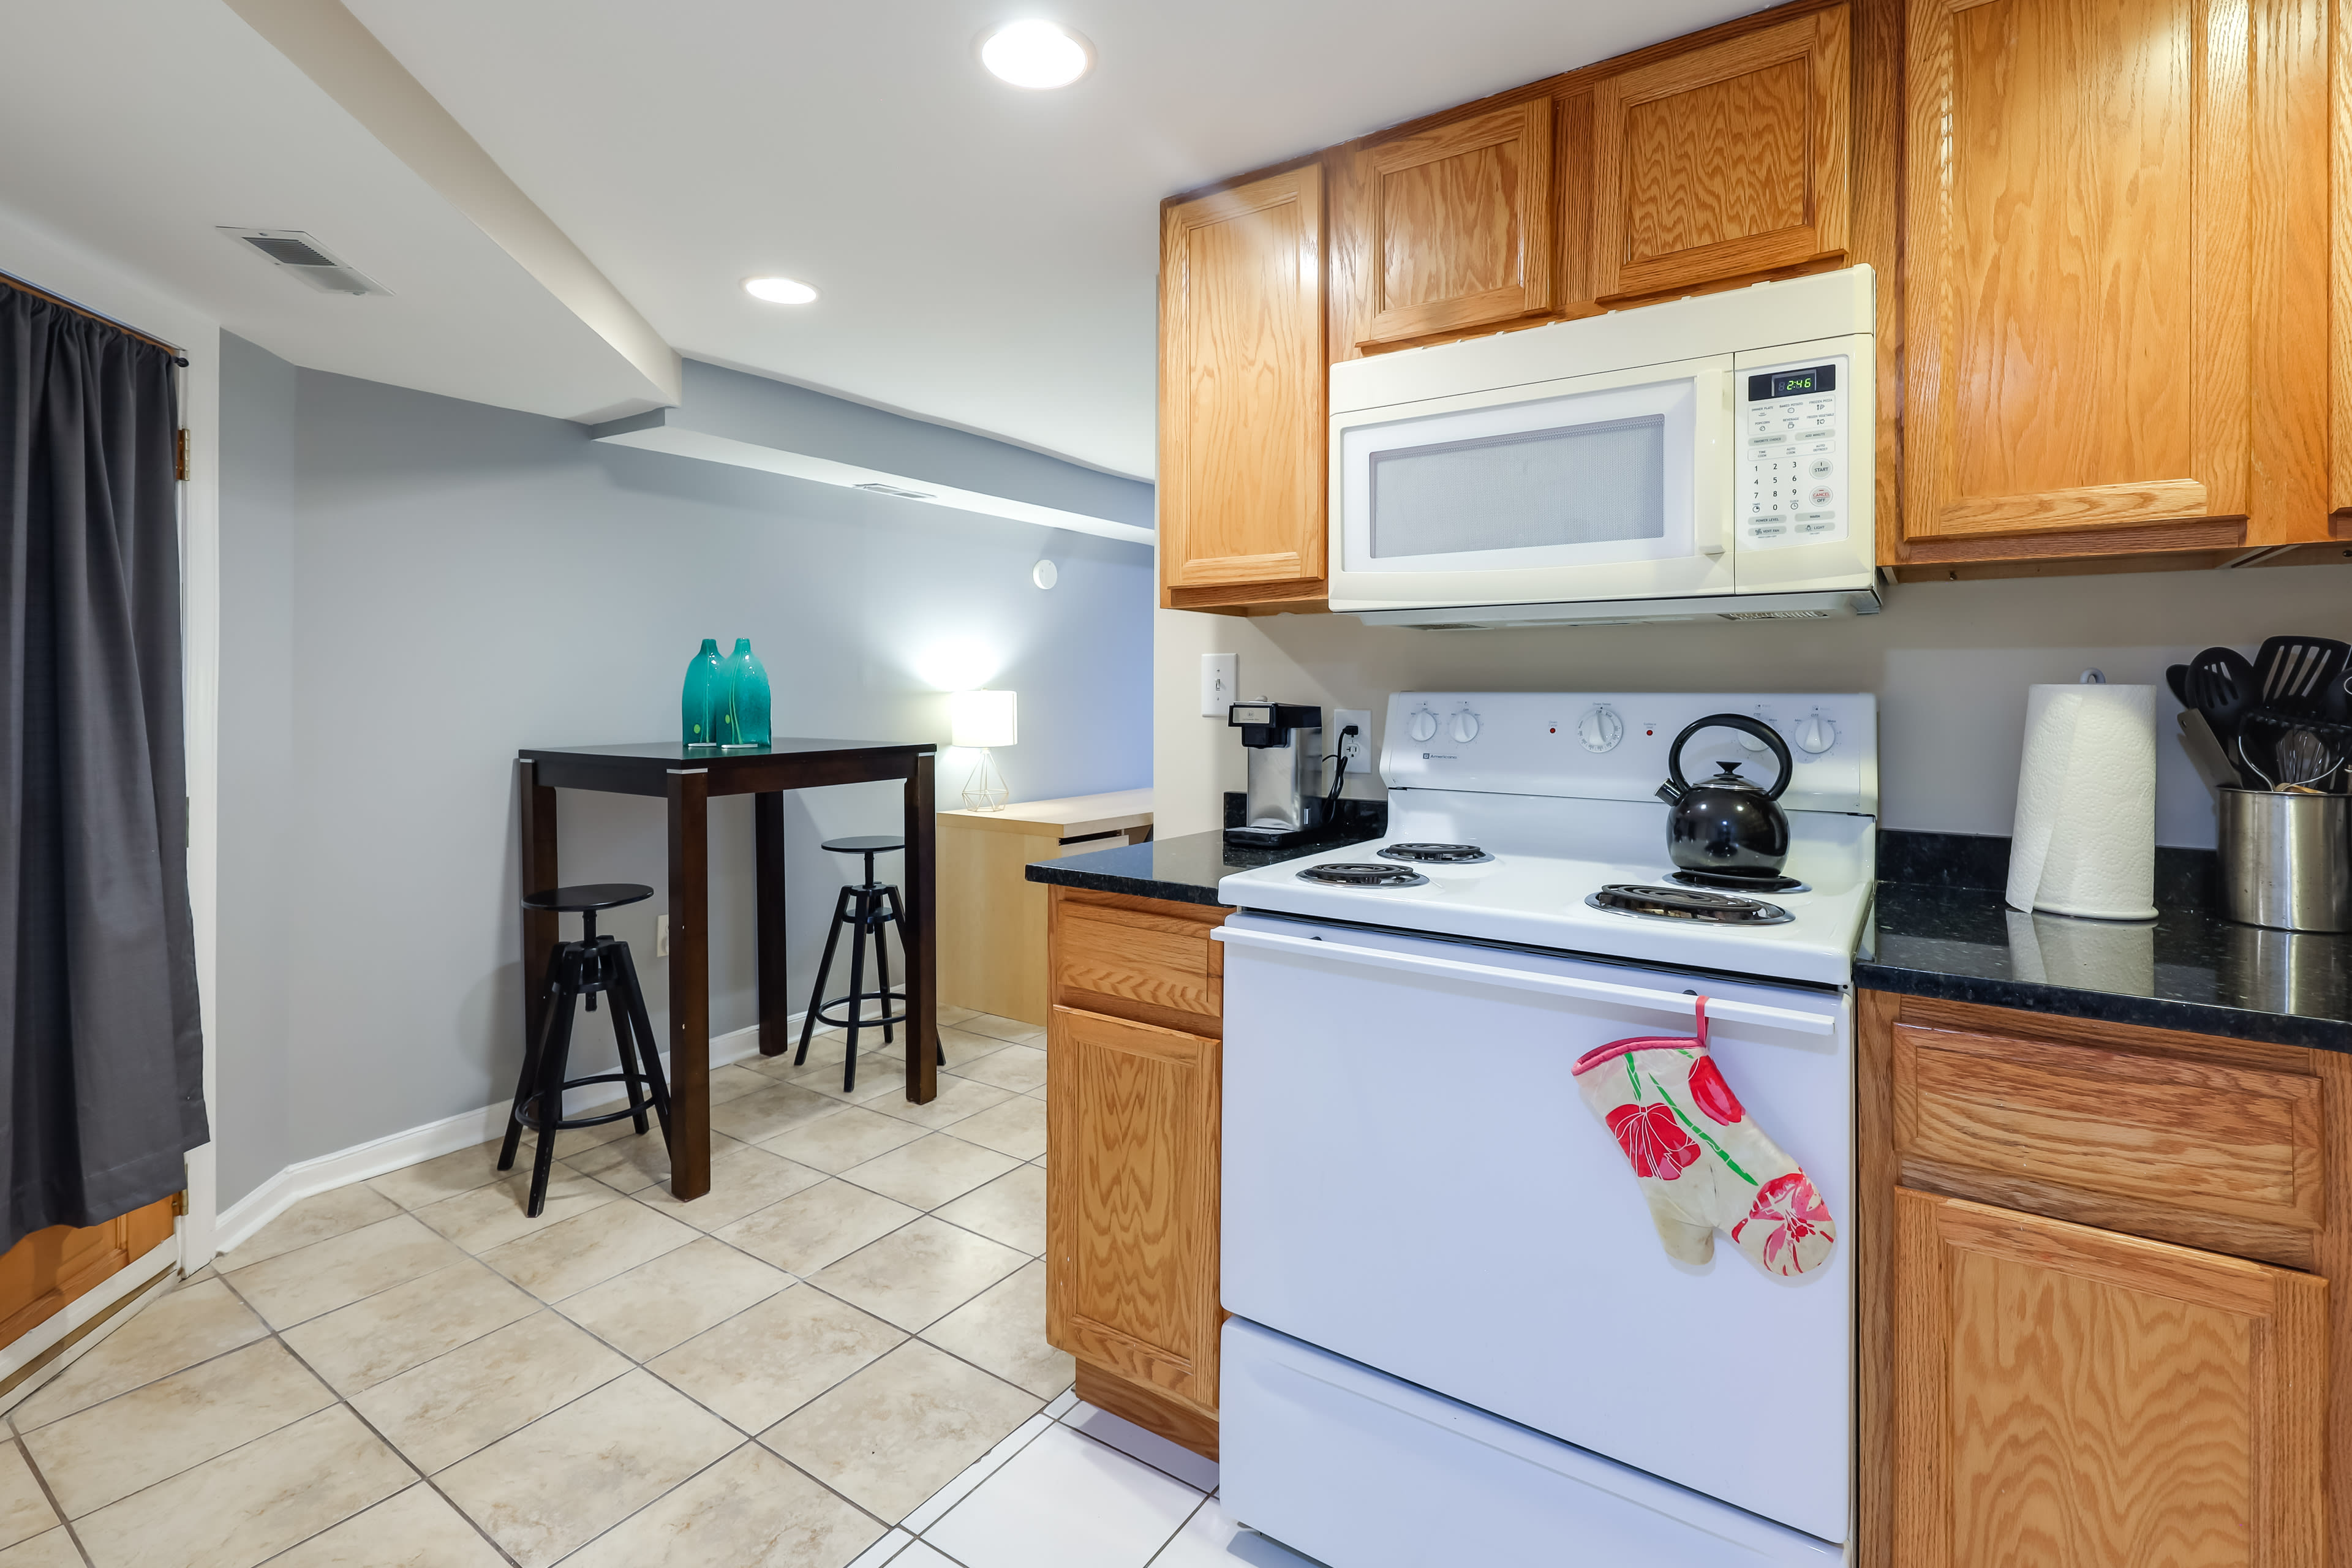 Kitchen & Dining Area | Coffee Maker | Dishware & Flatware Provided